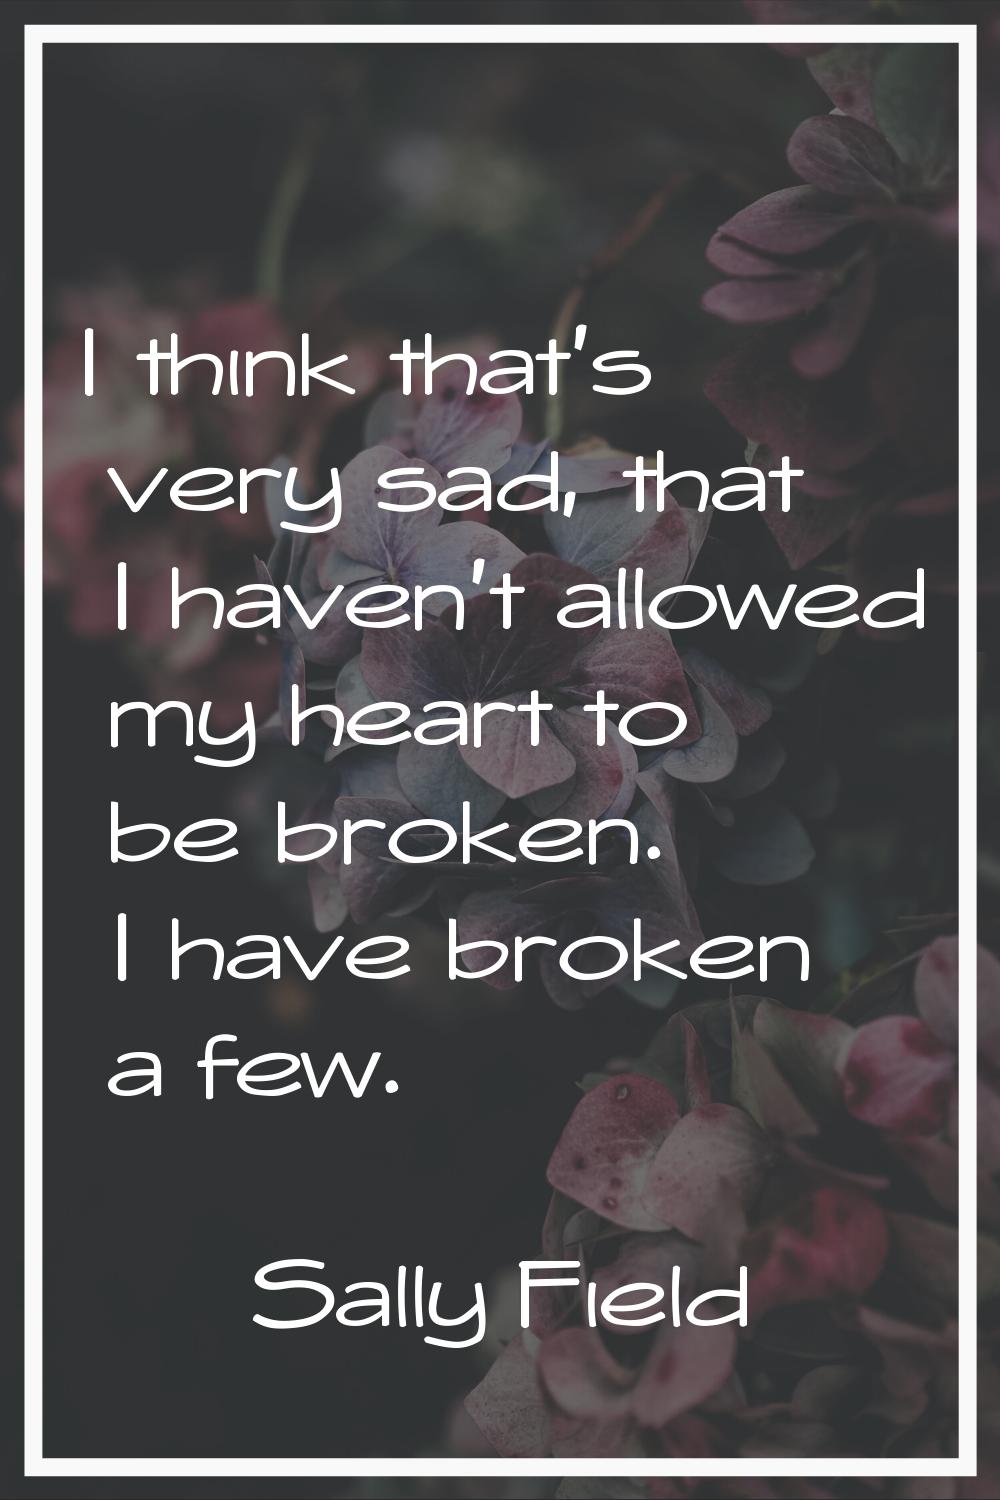 I think that's very sad, that I haven't allowed my heart to be broken. I have broken a few.